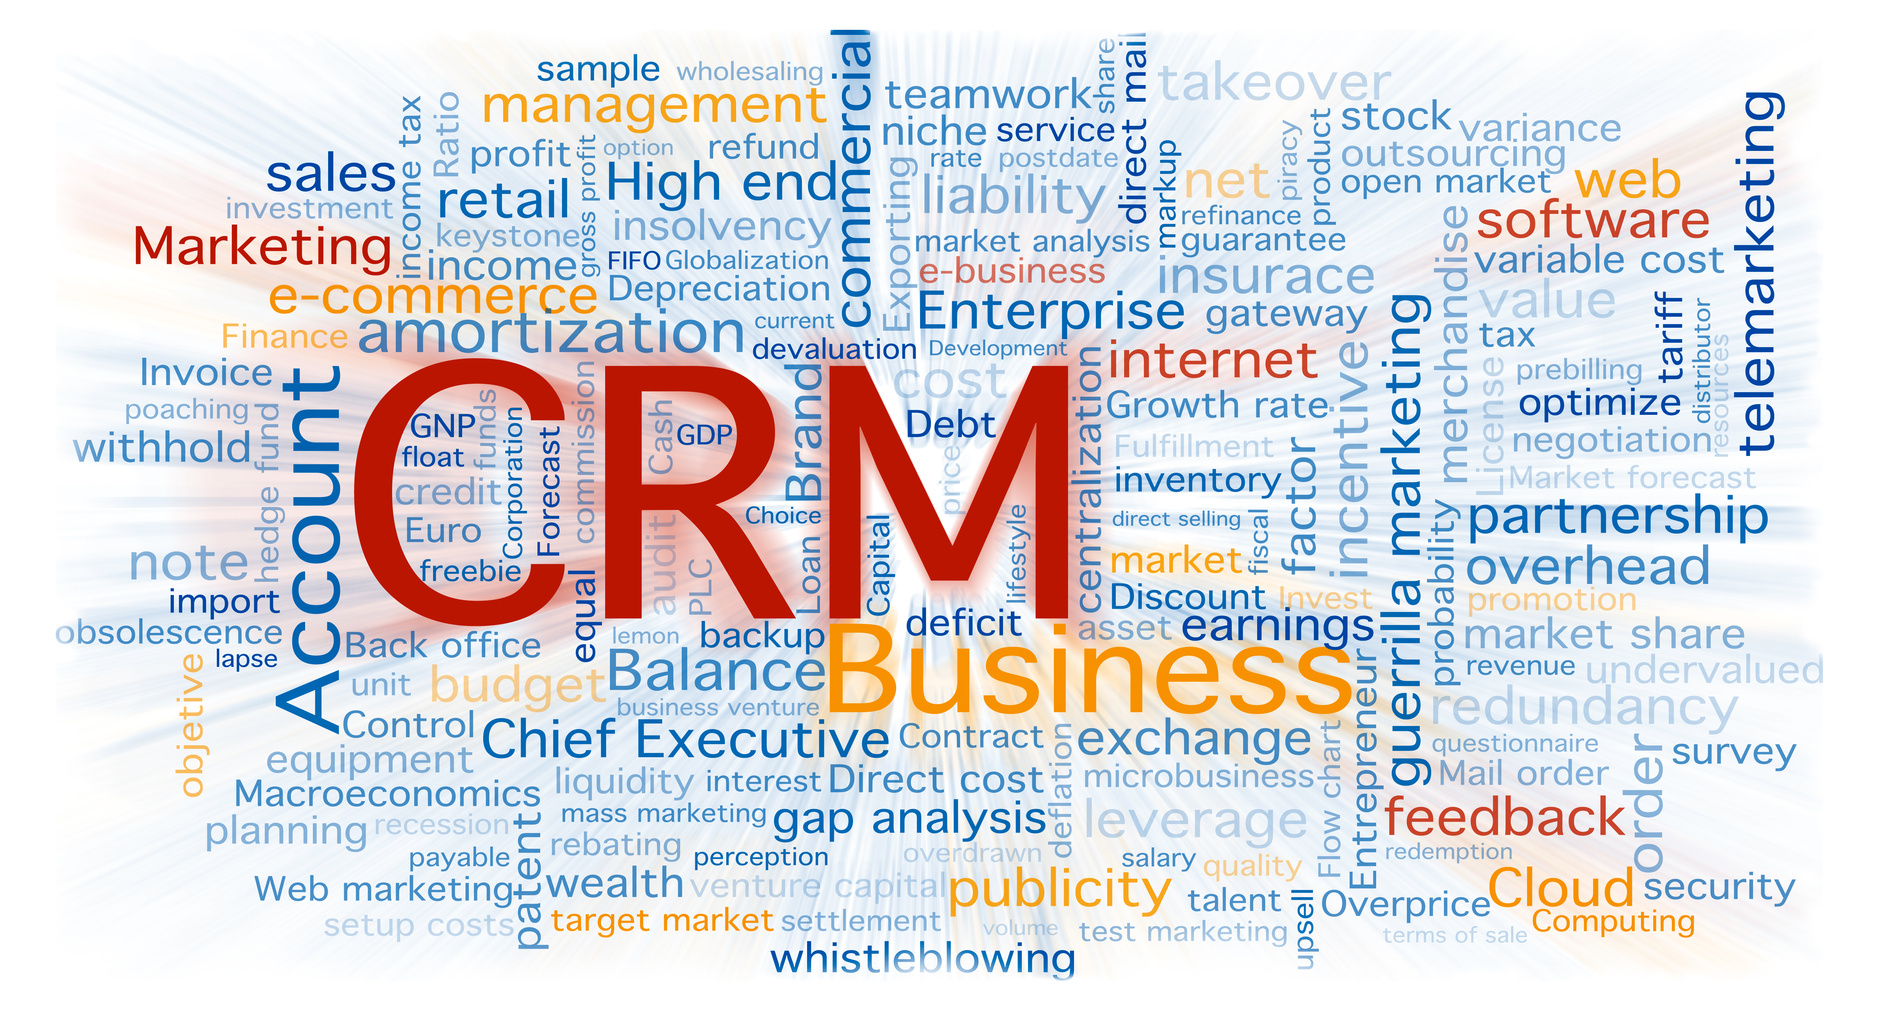 best CRM for small business India, CRM for a small business, affordable CRM software for small business, best CRM software for small business, CRM software for small business India, best CRM software small business online, sales CRM software small business, CRM program for small software, CRM software service provider, CRM small business software